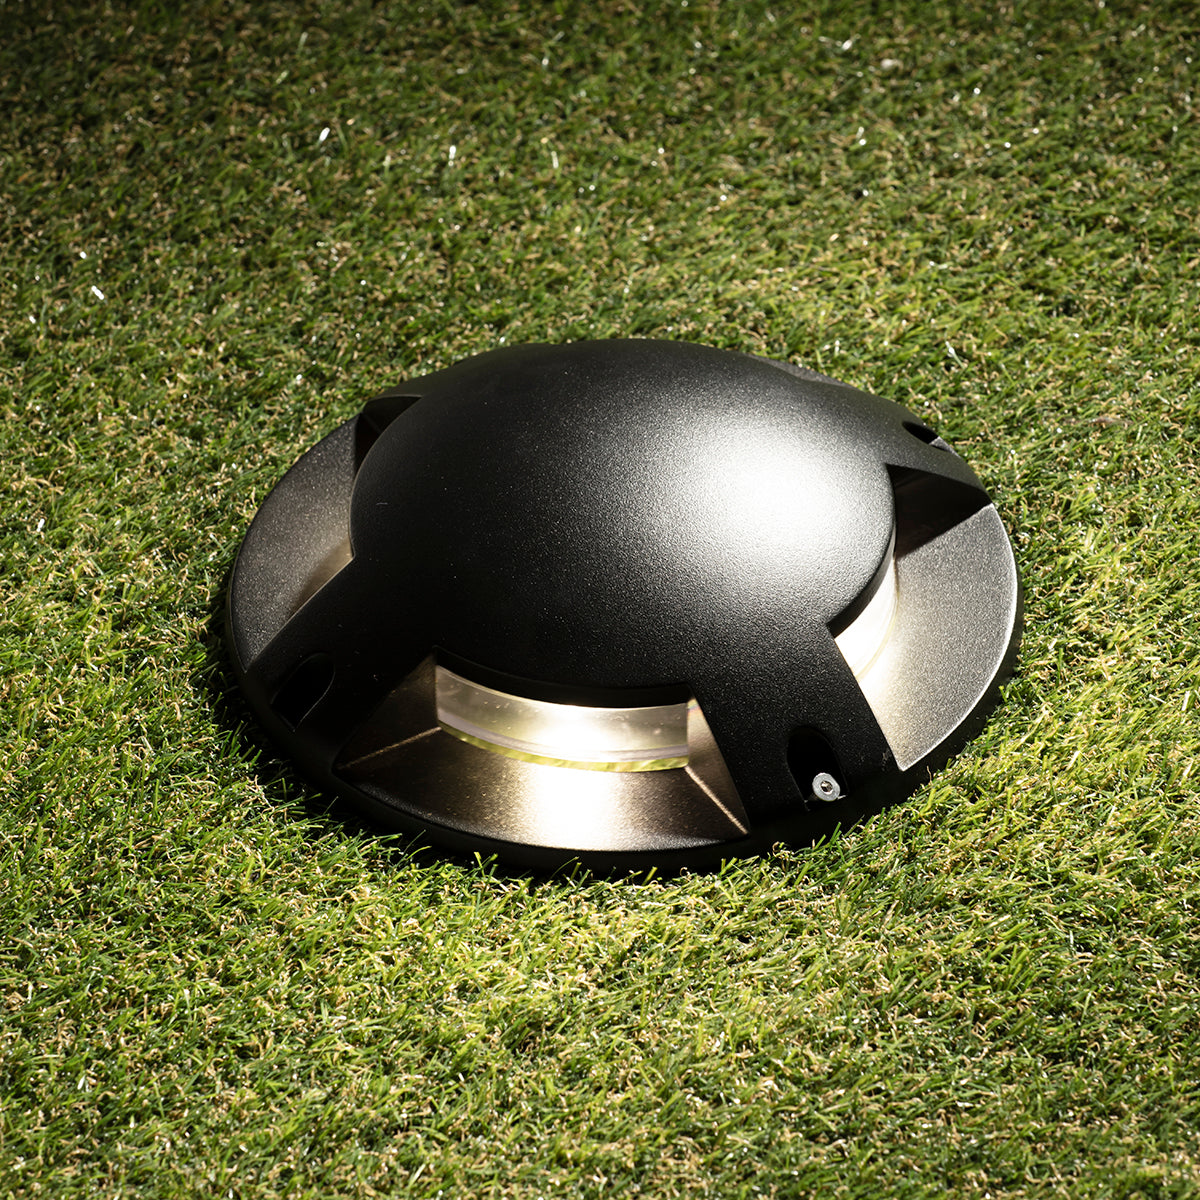 Our Apollo black outdoor surface mount ground light would look perfect in a modern or more traditional home design. Outside lights can provide atmospheric light in your garden, at the garden pathways or on the terrace as well as a great security solution. It is designed for durability and longevity with its robust material producing a fully weatherproof and water resistant light fitting.